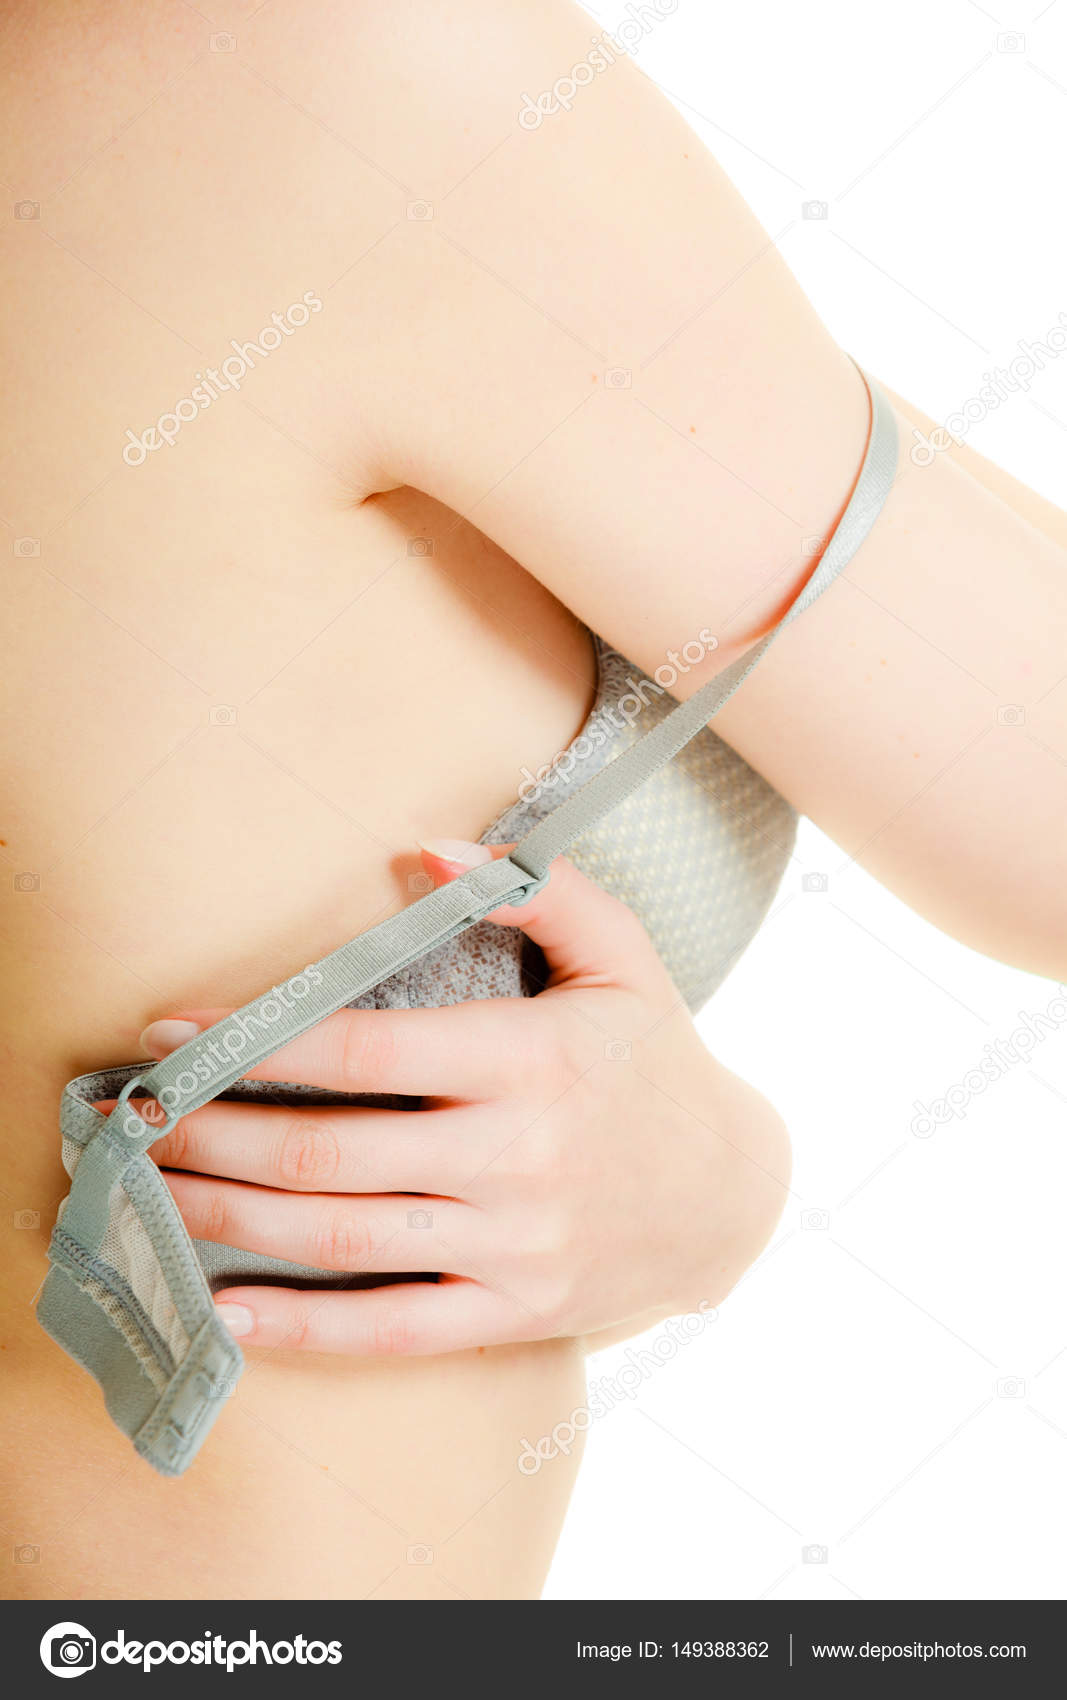 Woman putting on or taking off bra lingerie. Stock Photo by